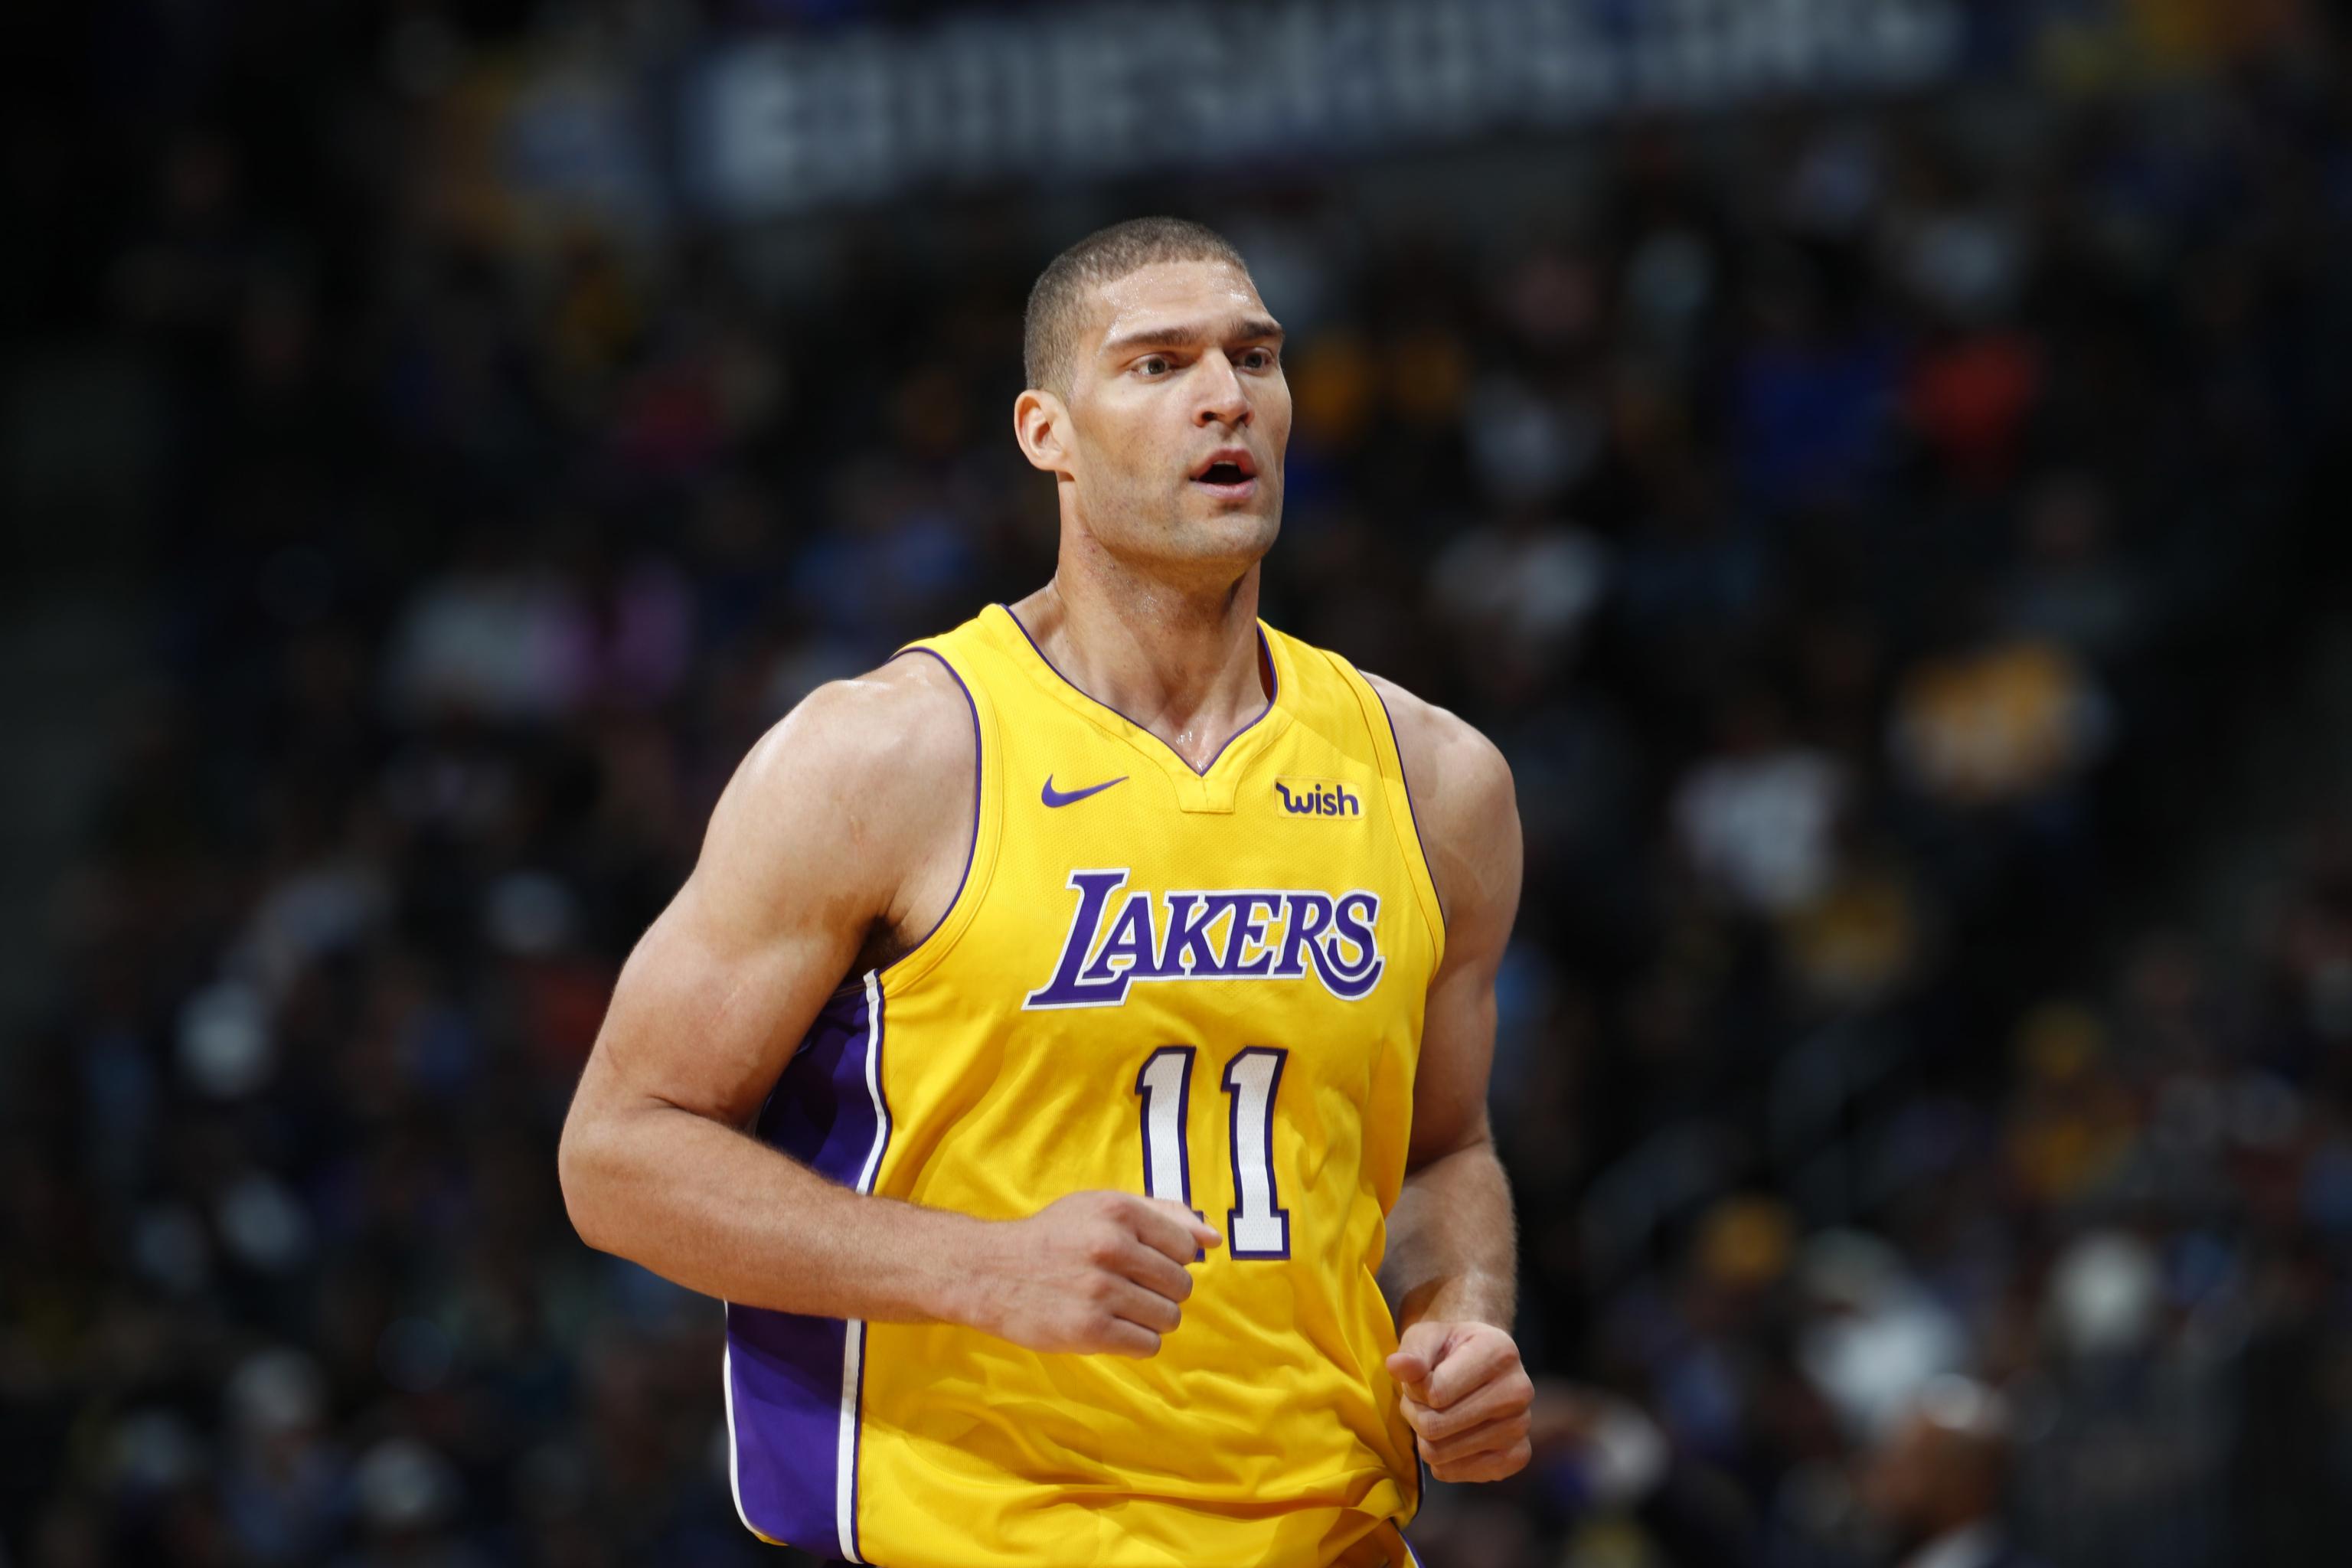 Nets Said to Be Trading Brook Lopez to Lakers for D'Angelo Russell